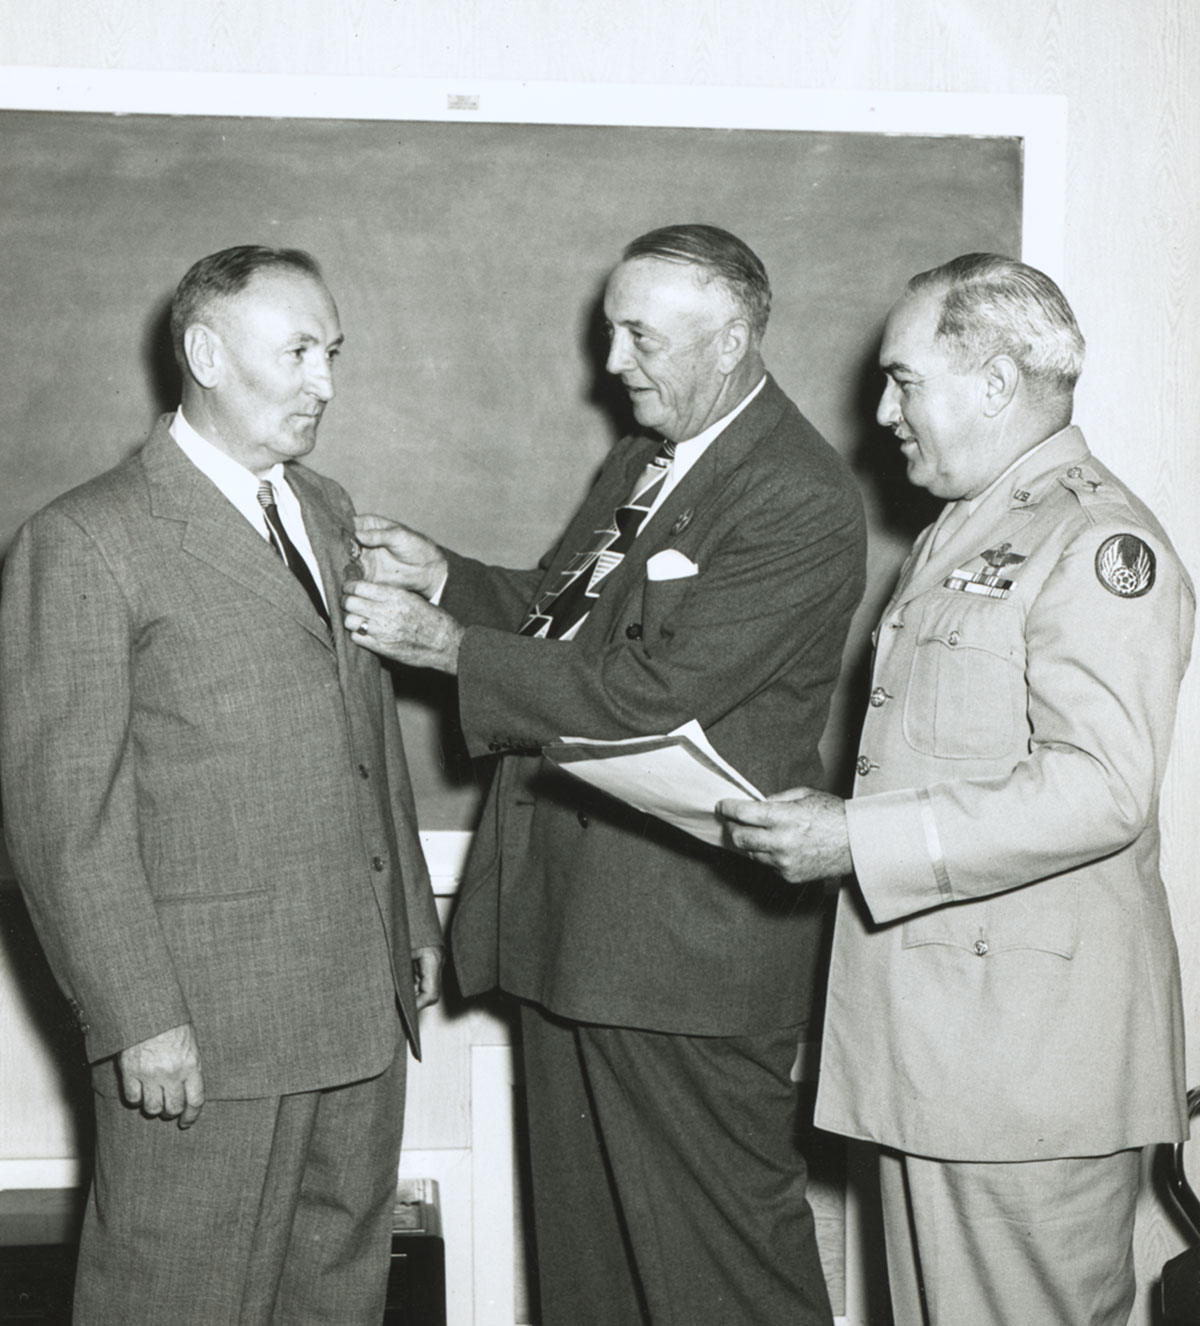 Fritz Zwicky was awarded the Presidential Medal of Freedom in 1949, one of the two highest civilian awards in the US at the time.